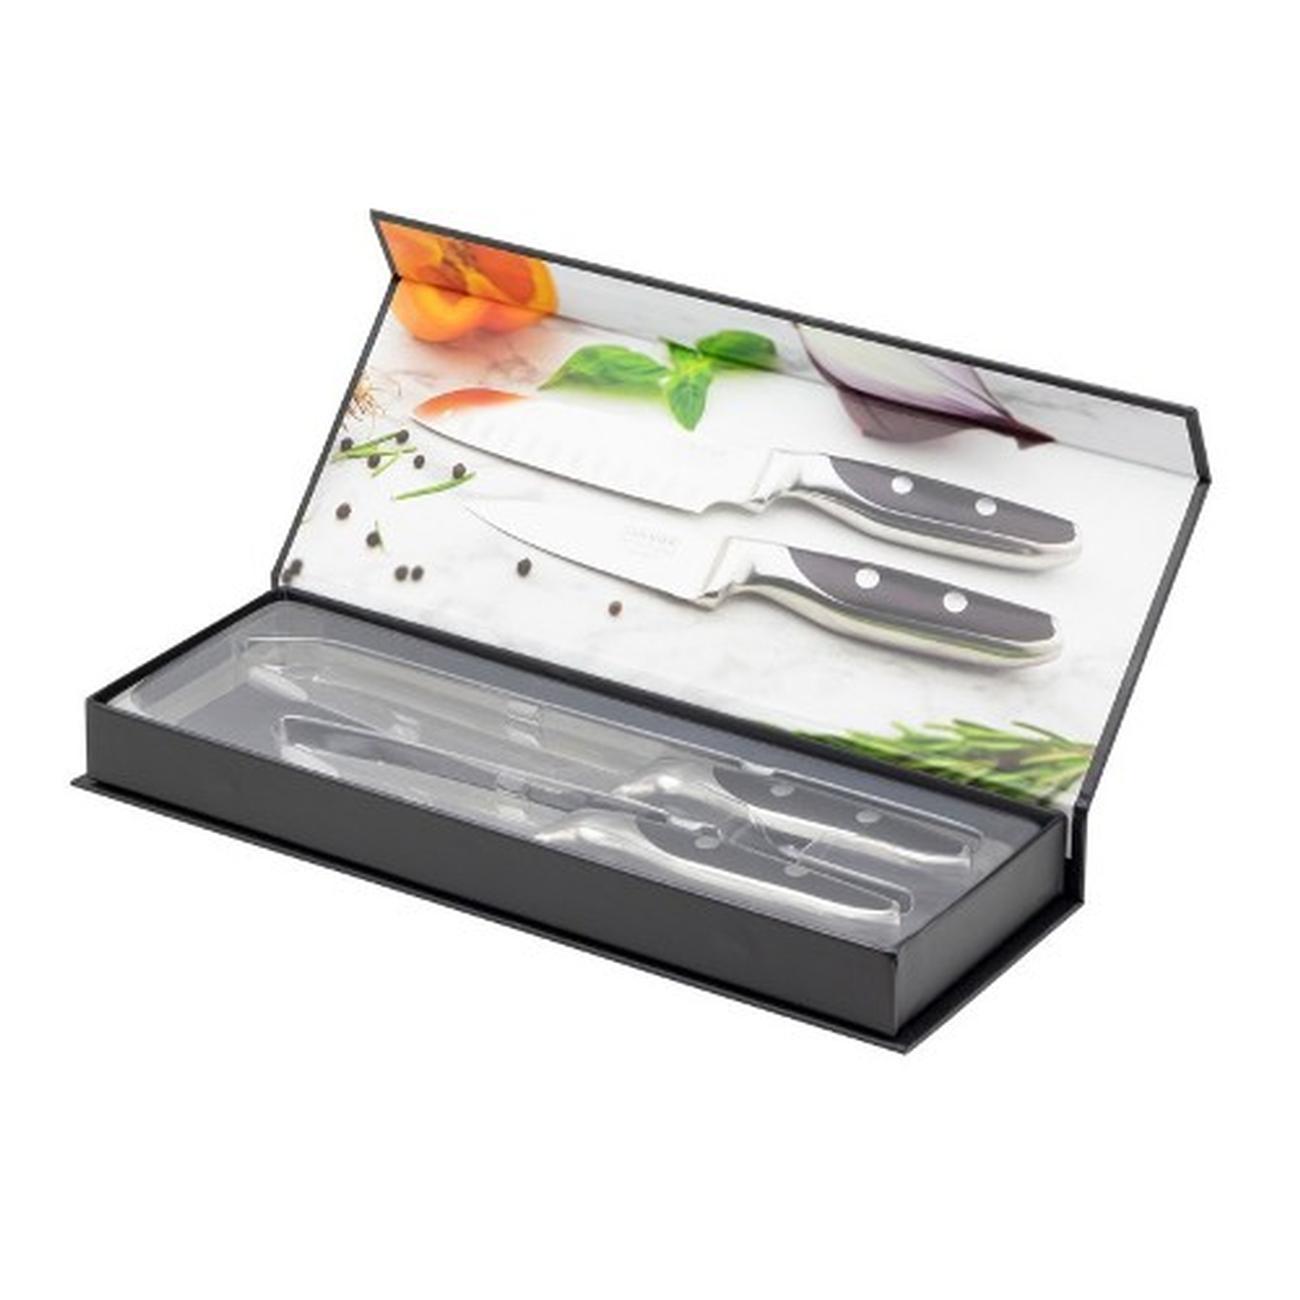 https://www.thekitchenwhisk.ie/contentfiles/productImages/Large/Sabatier-Professional-116-Series-2pc-Paring-Knife-and-Santoku-Set-2.jpg